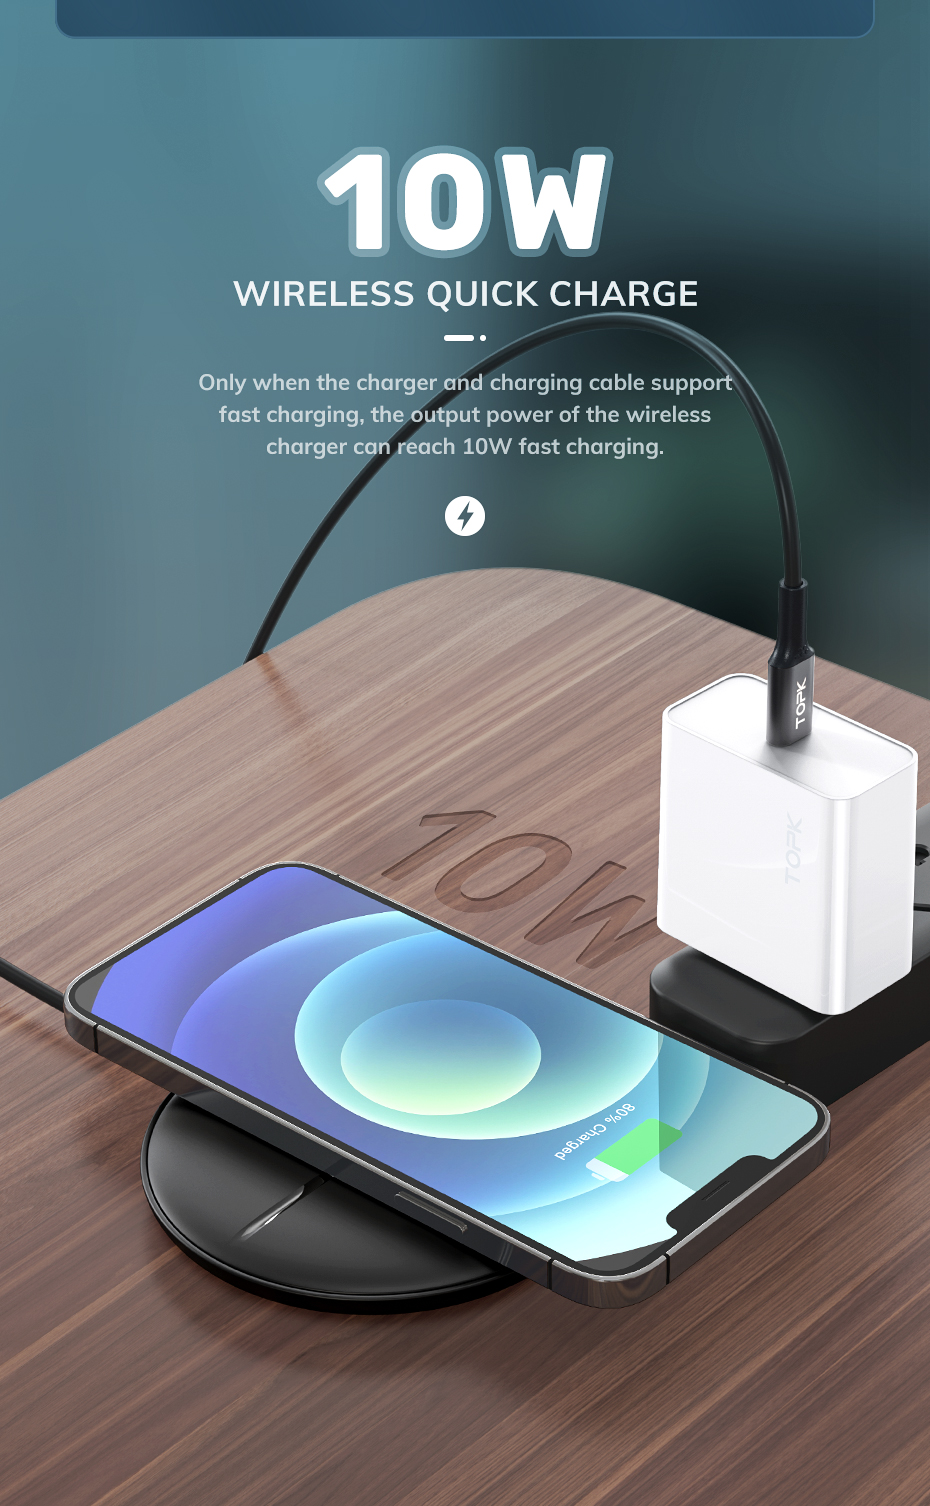 TOPK-B09W-10W-Wireless-Fast-Charging-Charger-for-for-iPhone-12-12-Pro-Max-for-Samsung-Galaxy-S21-Ult-1888051-2